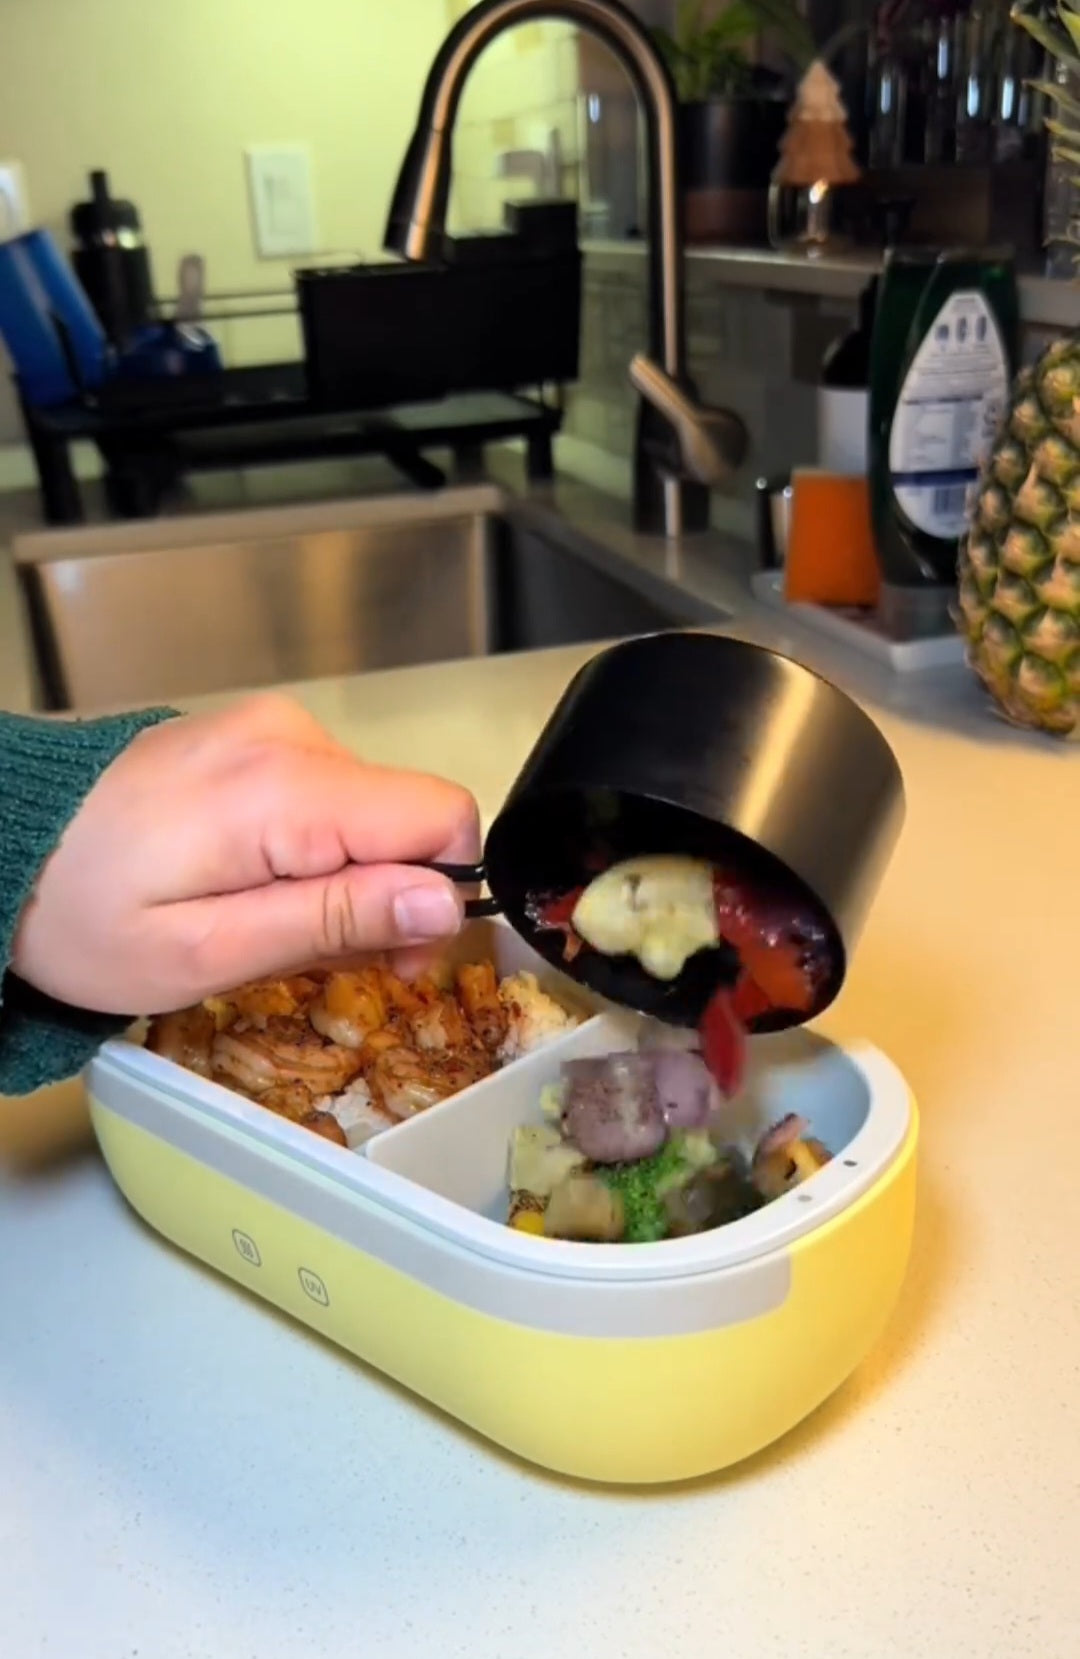 Anytime just turn it on , let it heat up your lunch and enjoy!